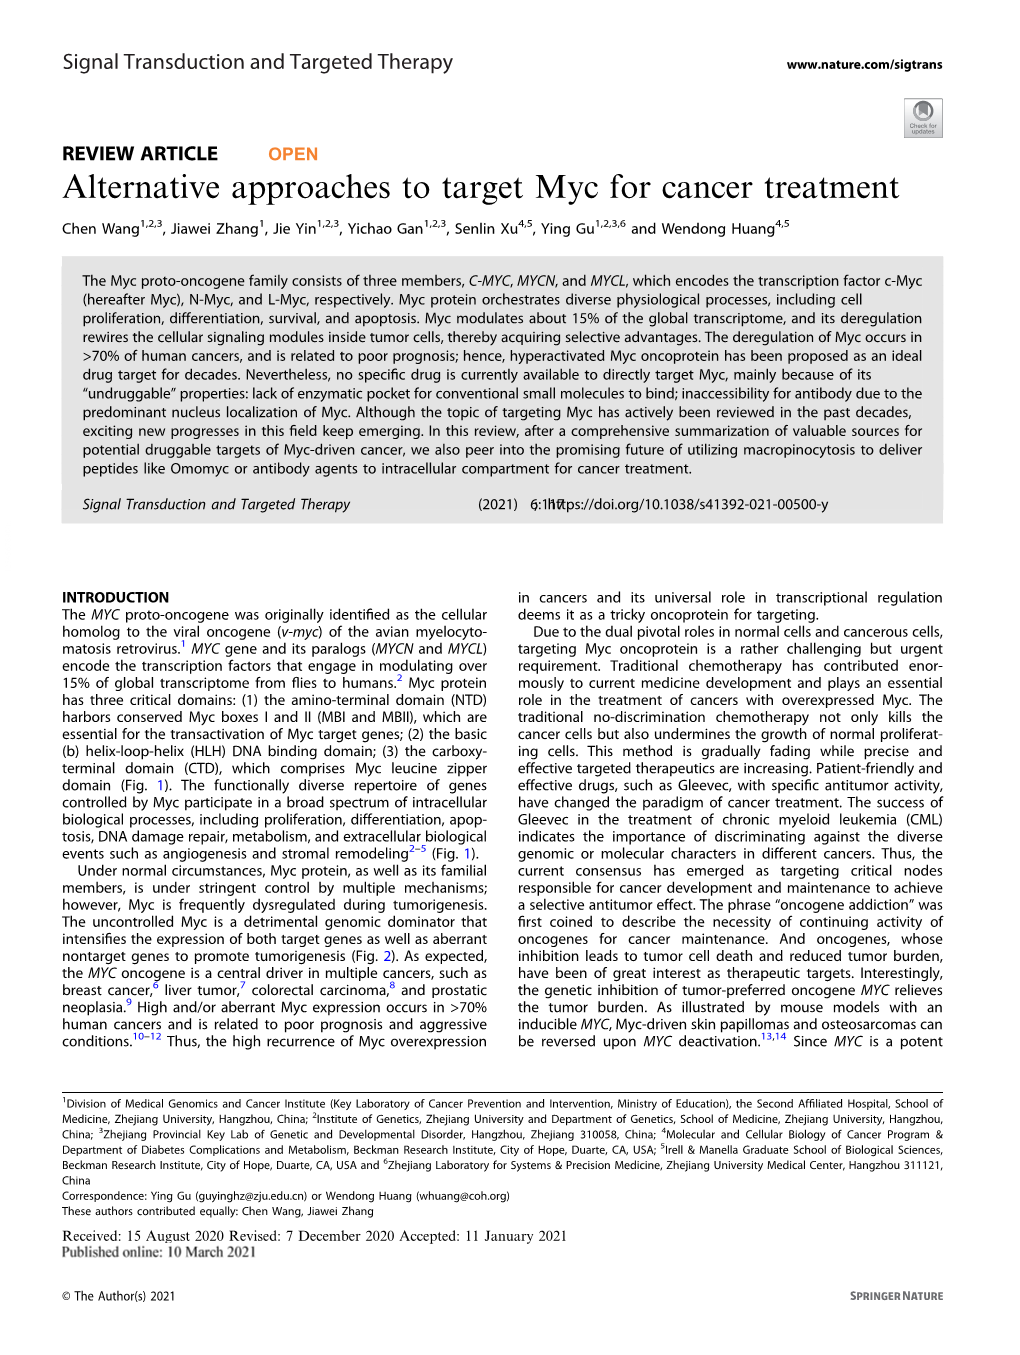 Alternative Approaches to Target Myc for Cancer Treatment